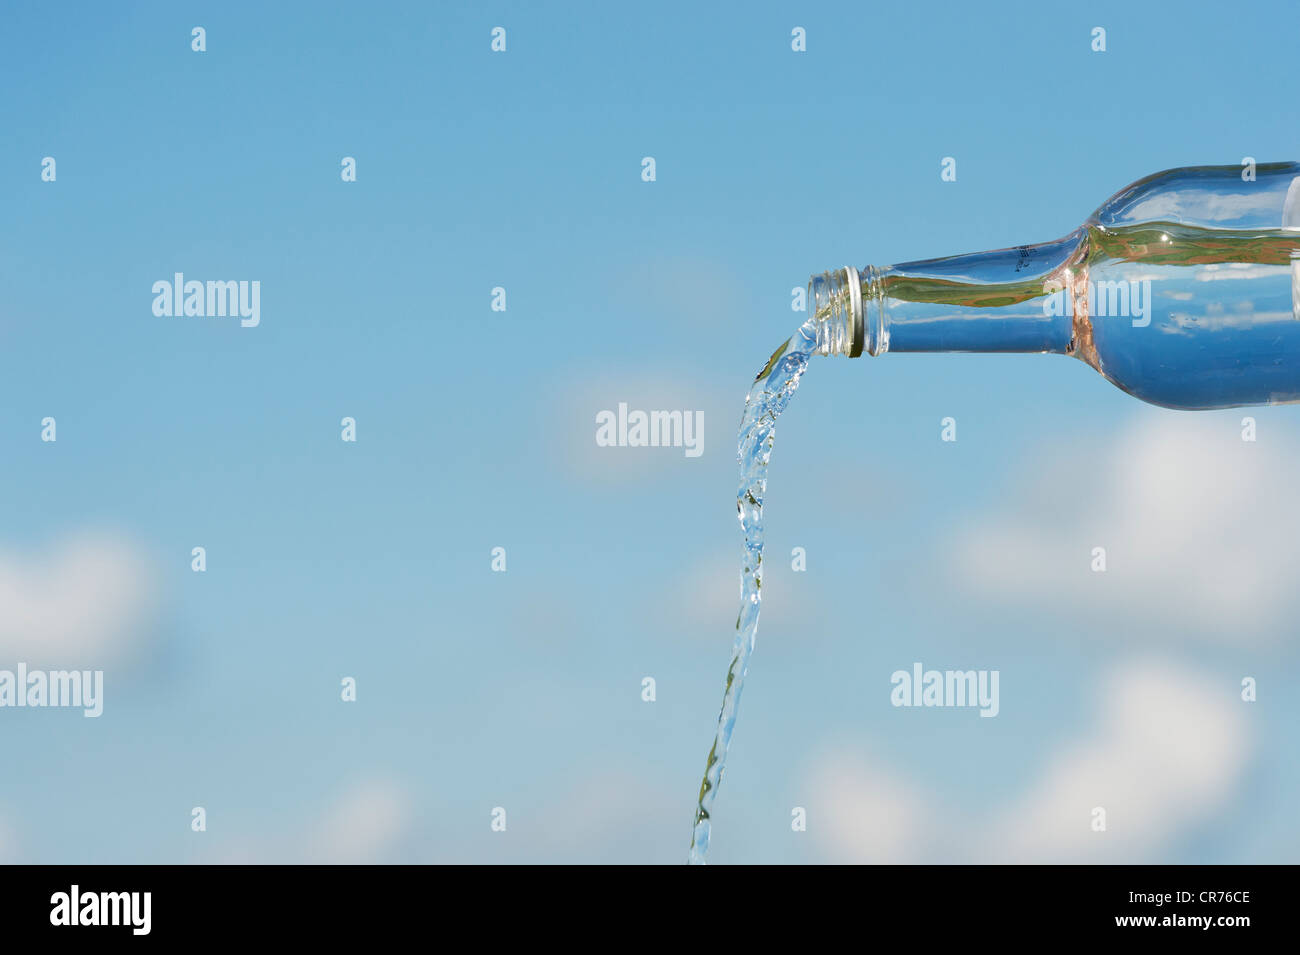 Pouring drinking water from a glass bottle against a blue sky Stock Photo